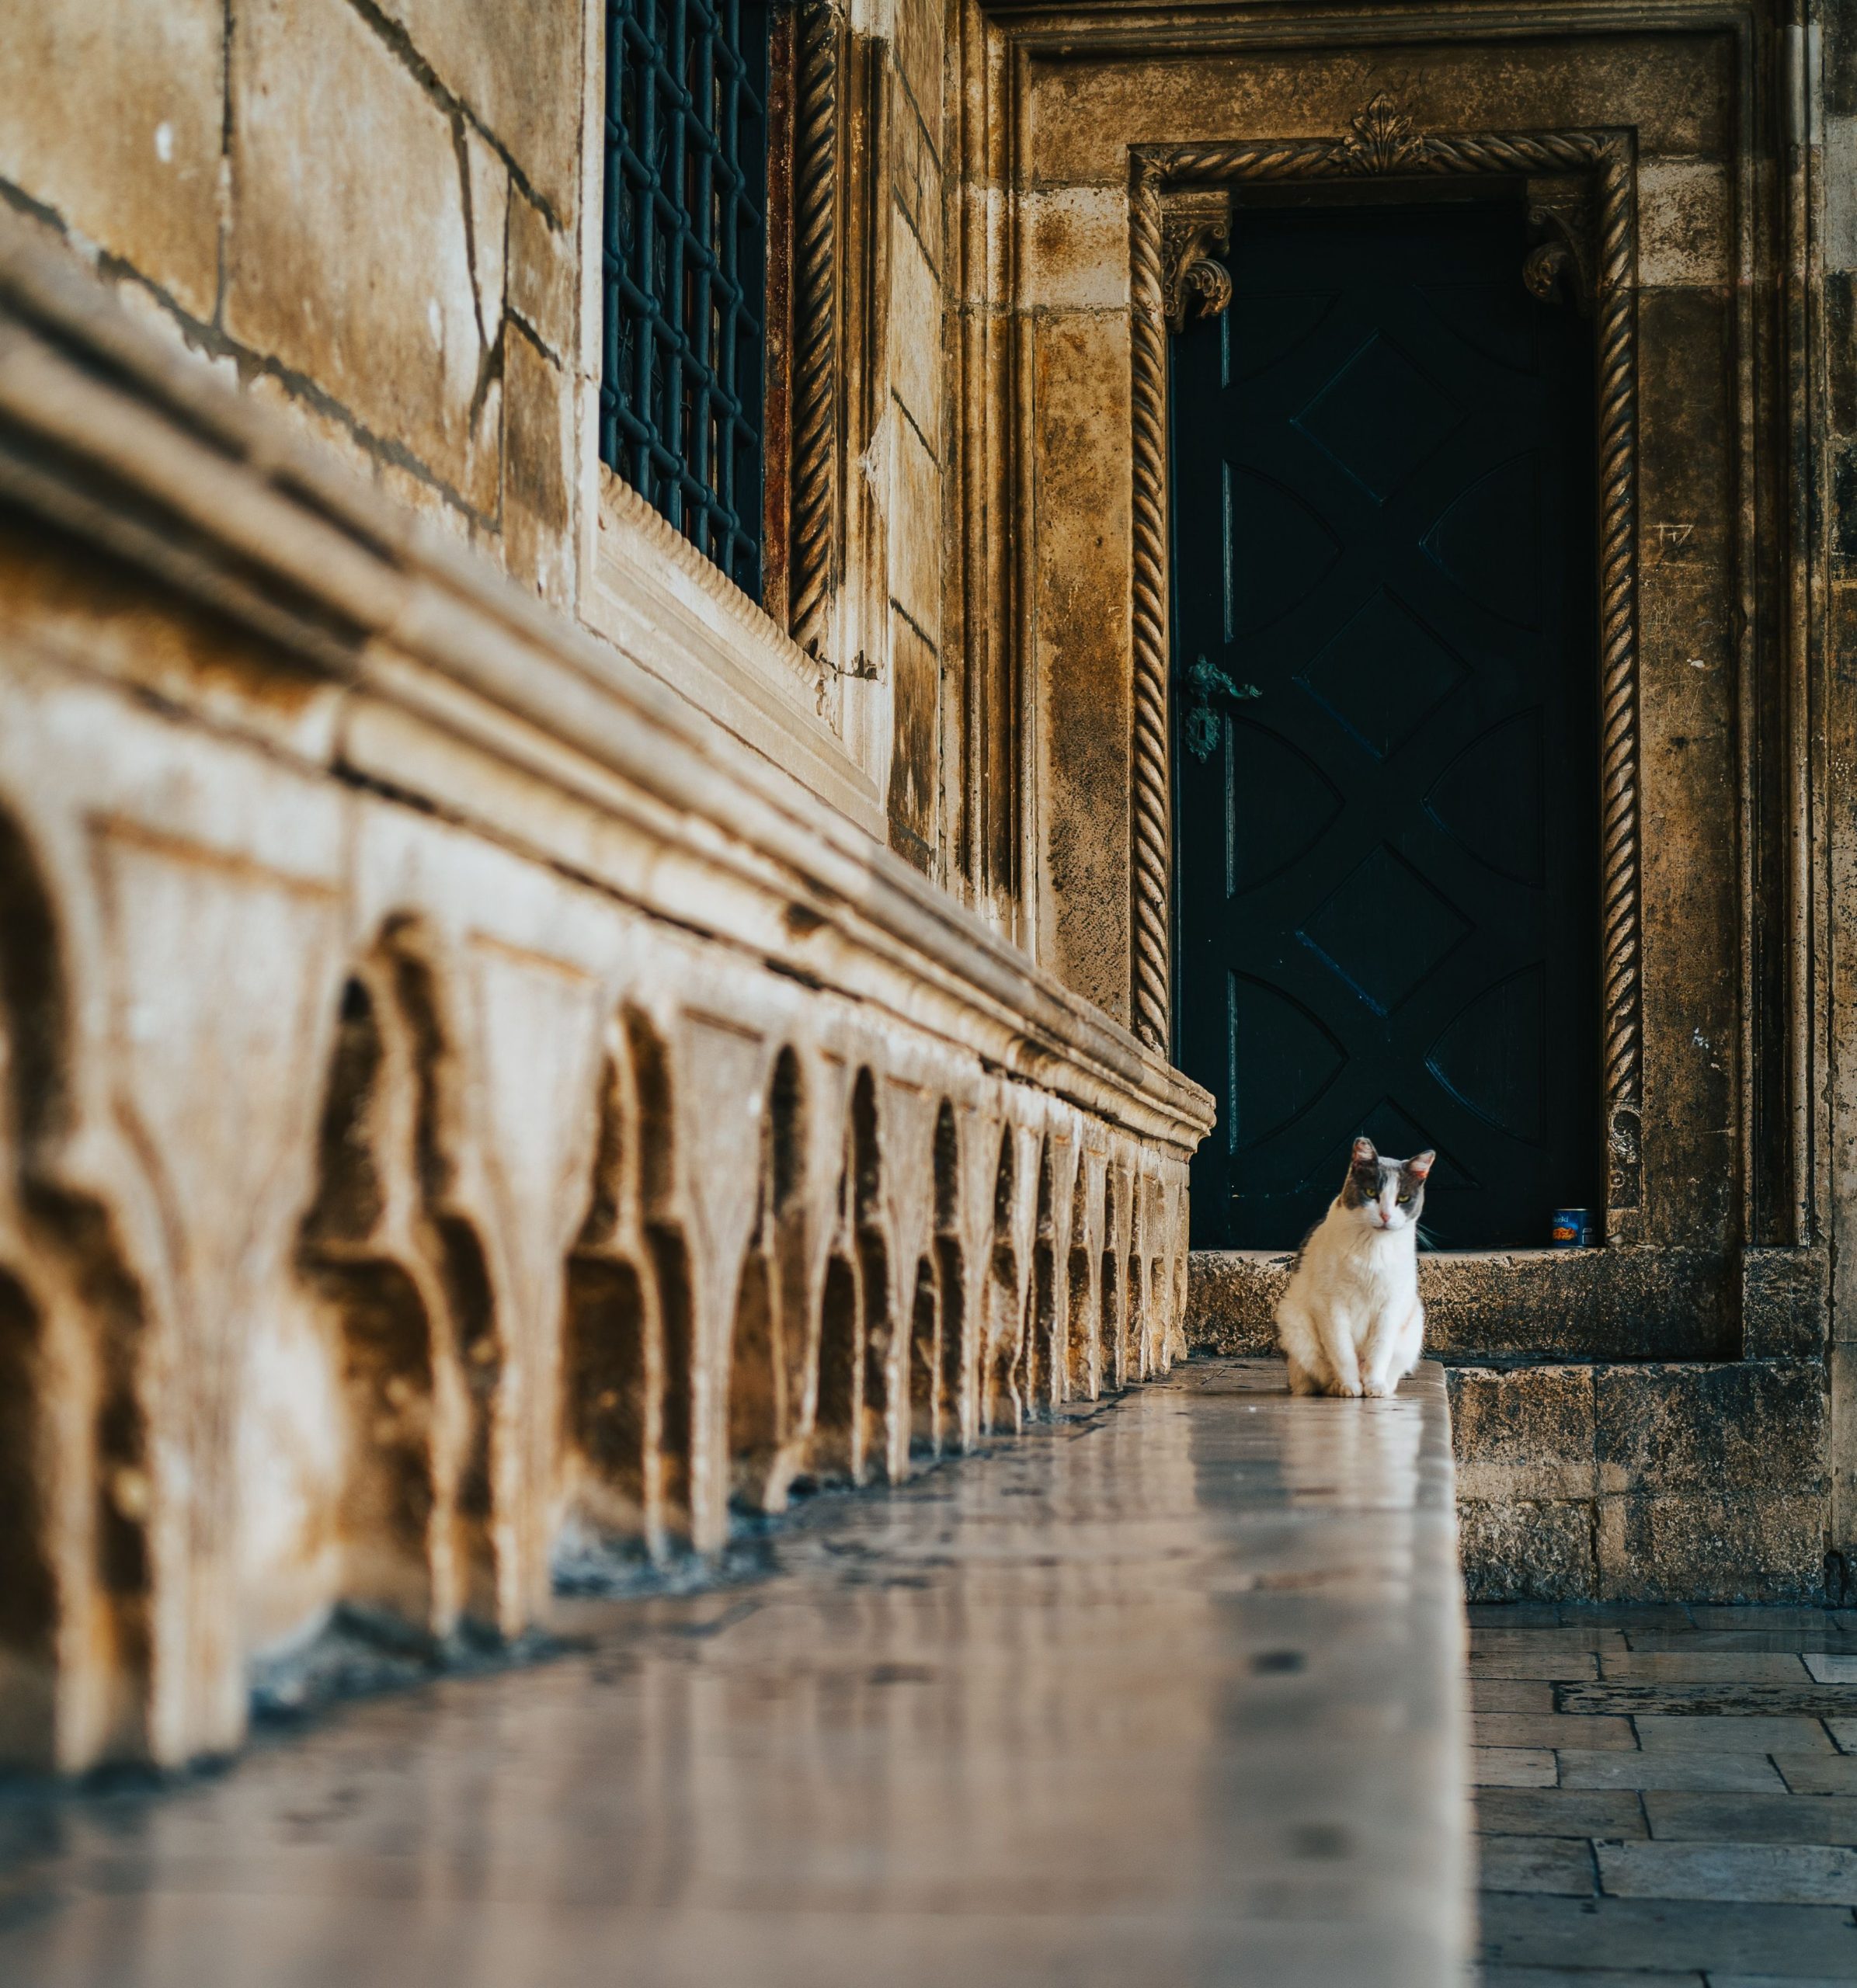 Dubrovnik’s most famous cat gets a home